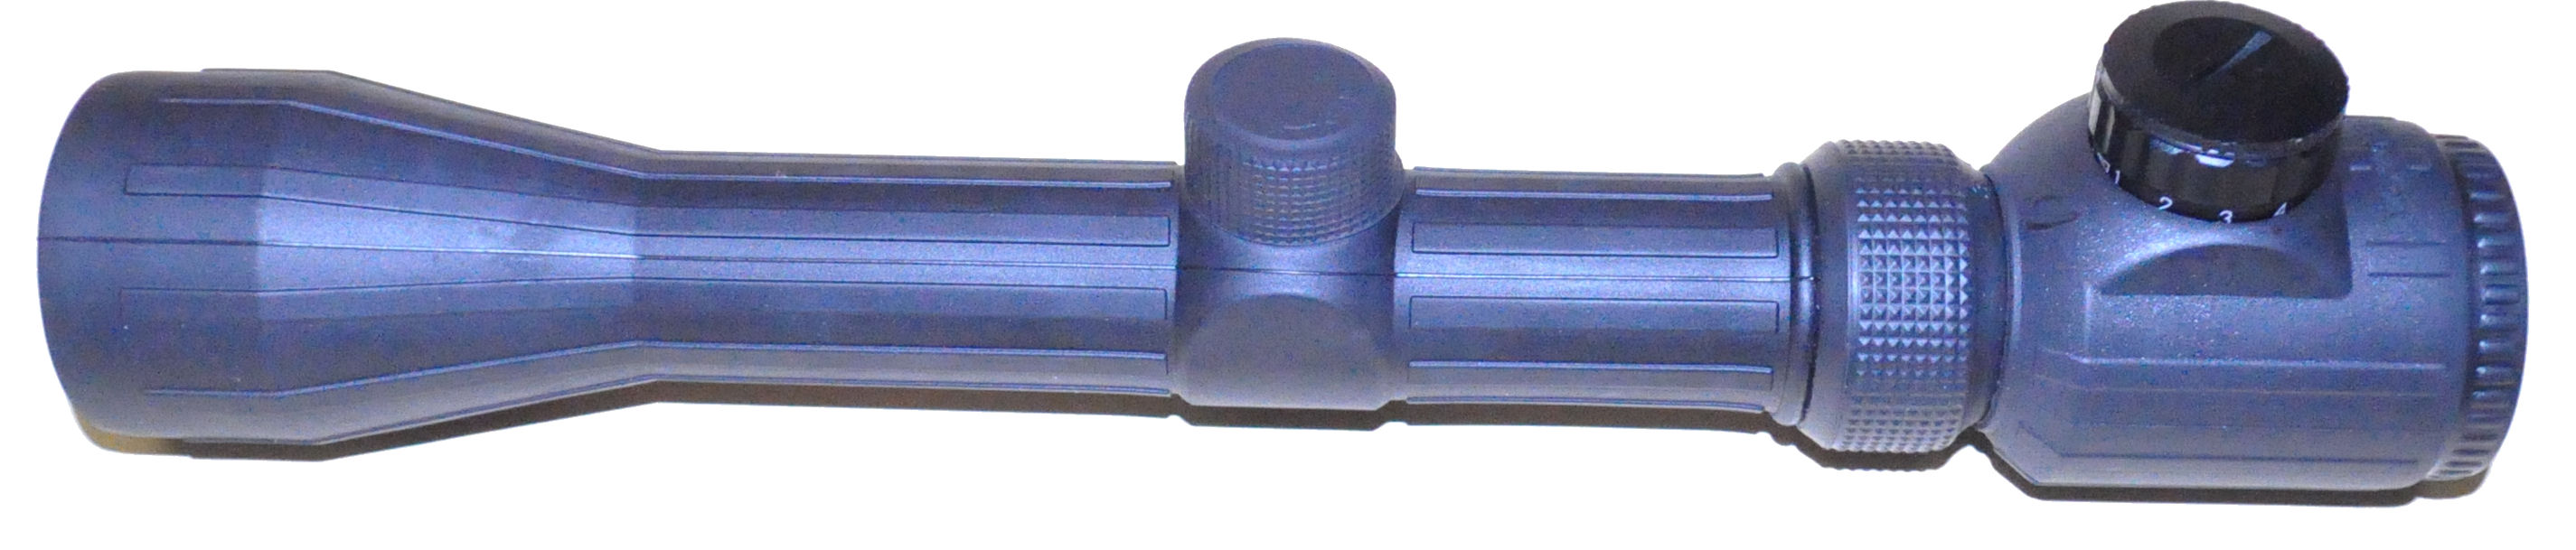 3-9X40 Dual-ill 30mm Armoured Scope with mounts